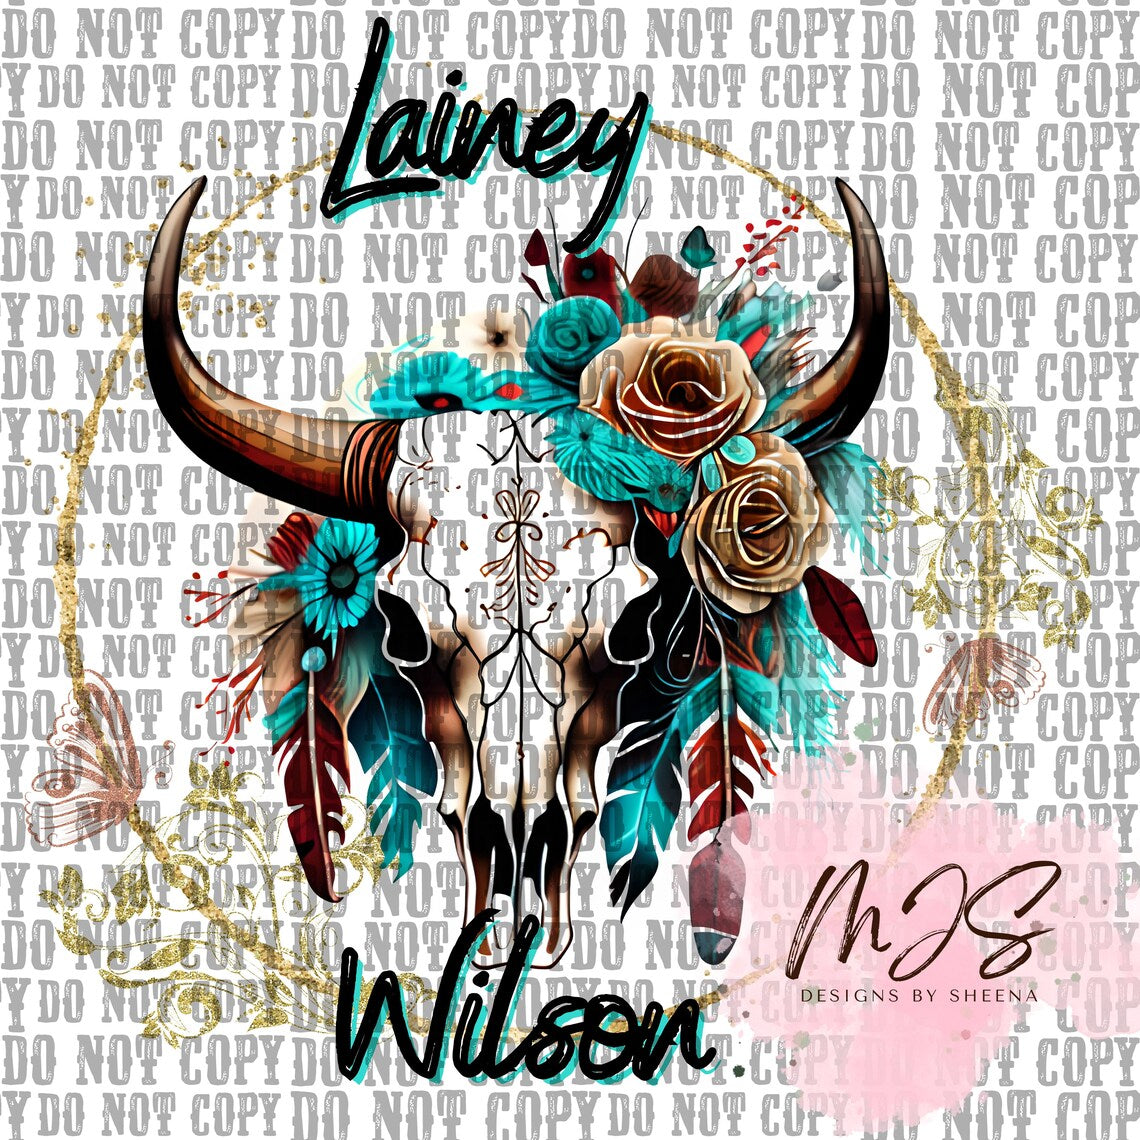 Lainey Wilson png – MJS Designs by Sheena